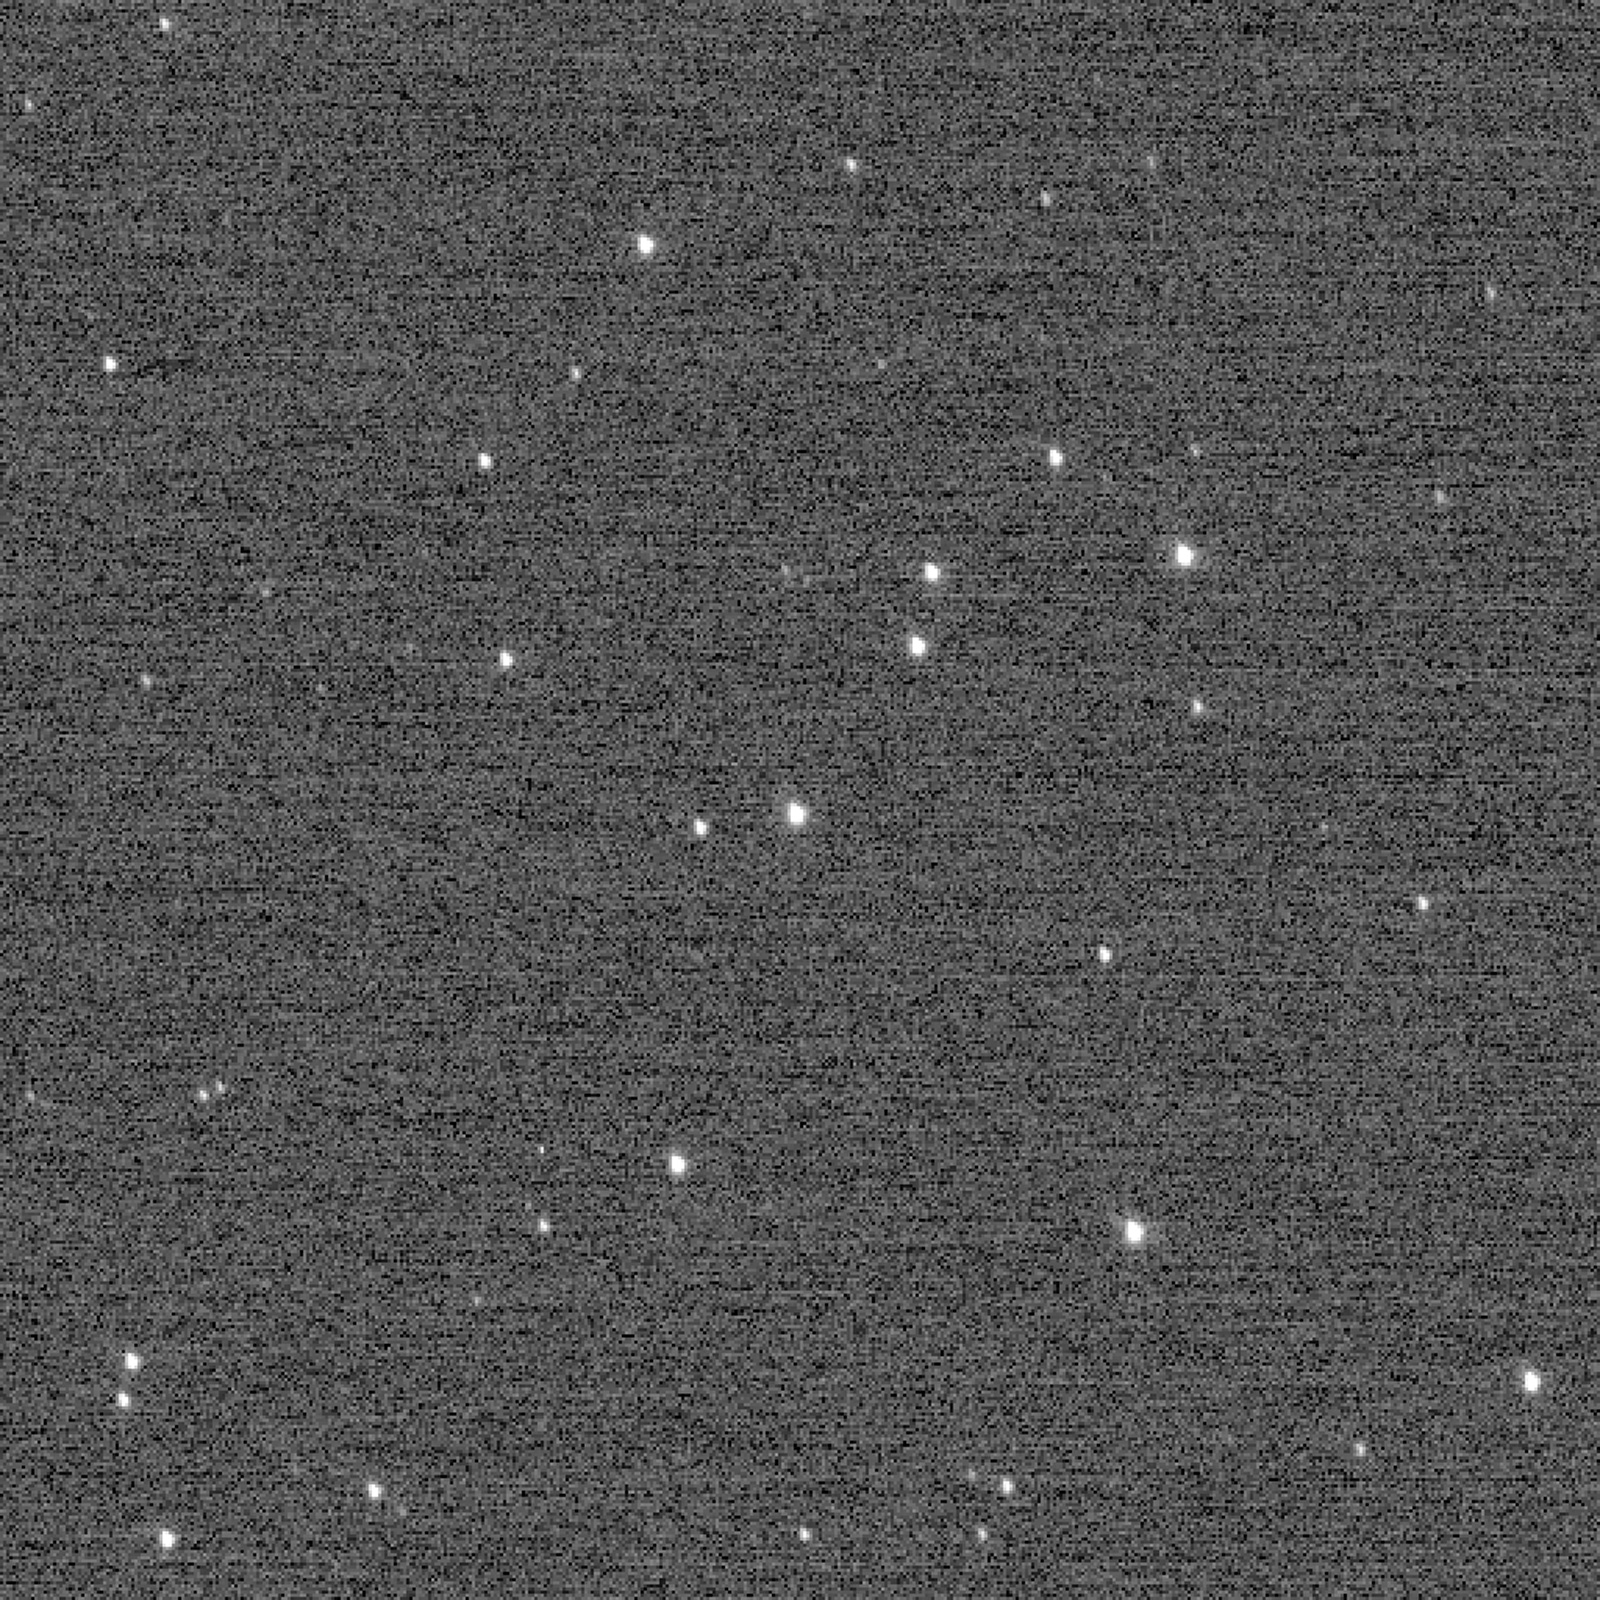 New Horizons probe captures images at record distance from Earth | DeviceDaily.com